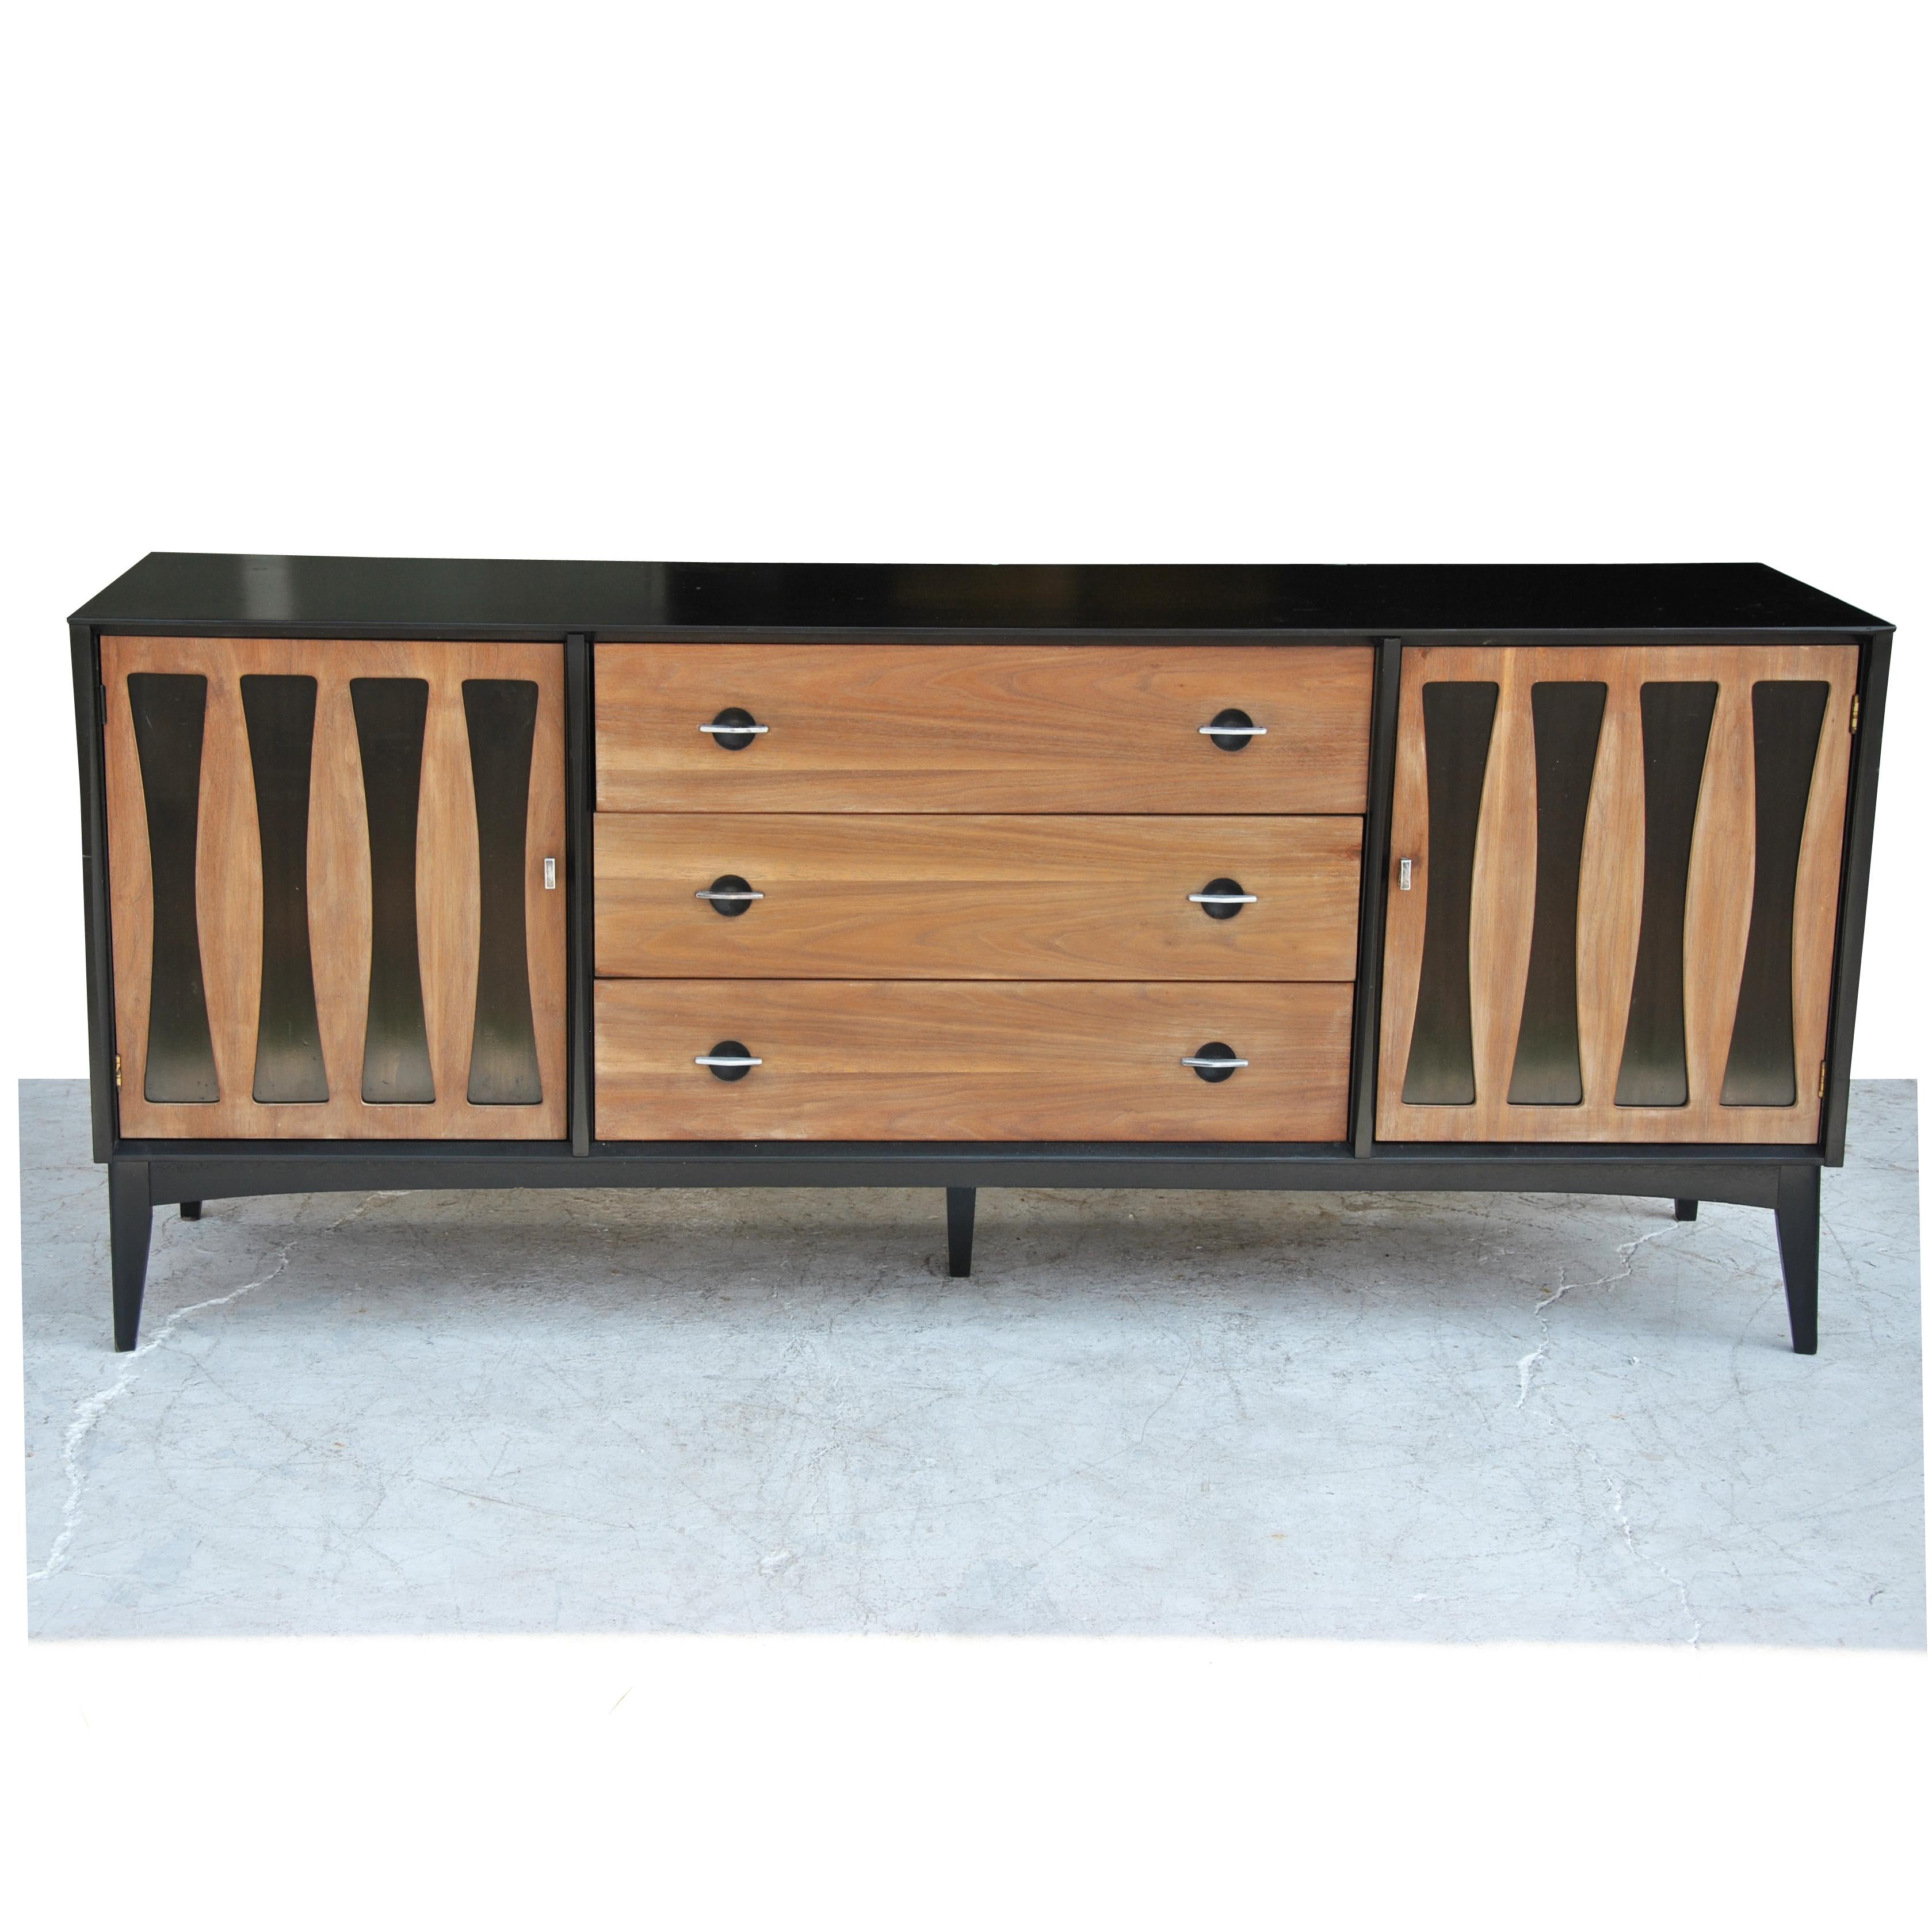 FT Vintage midcentury Dresser with Ebonized Case and Panels 

Featuring 3 drawers with an additional 6 revealed behind ebonized inlay doors. Walnut with chrome pulls. 
Measures:
6 ft W x 19